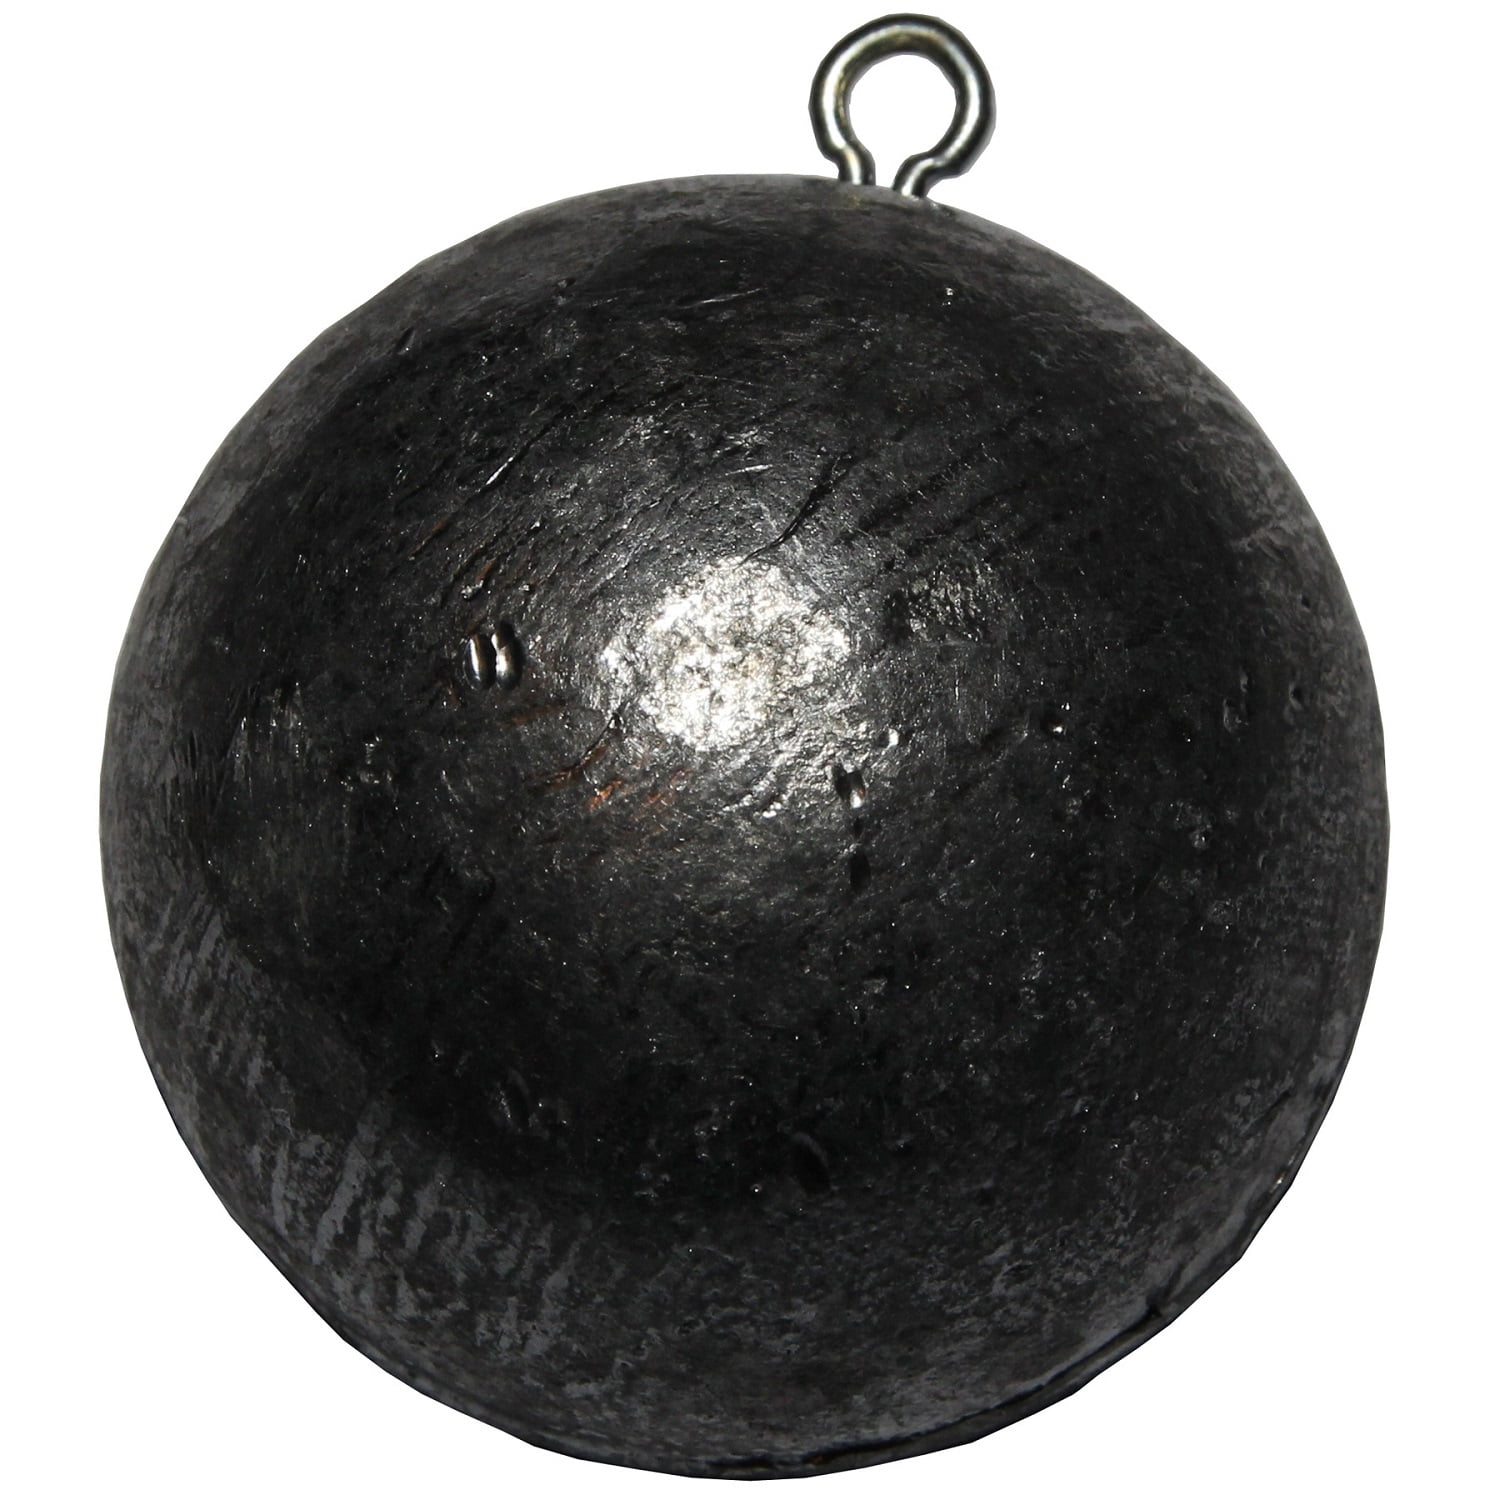 10 1lb Sinker with Brass Eyes Deep Drop Free Shipping Lead Cannon Ball Weight